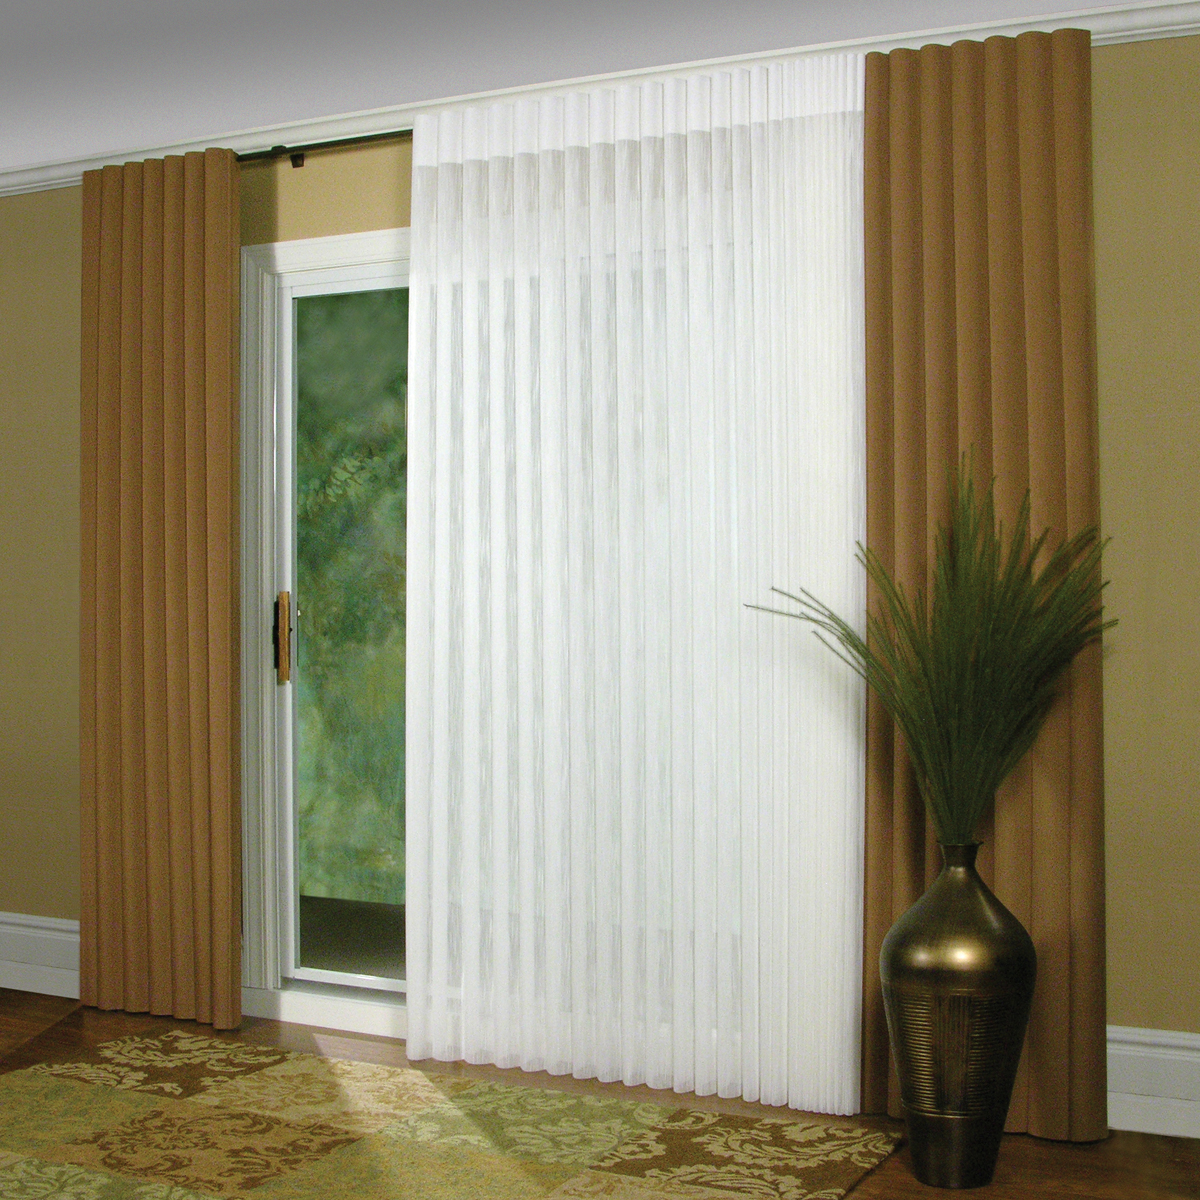 curtains for sliding glass doors with vertical blinds image of: patio blinds for sliding glass doors DGBKRMO